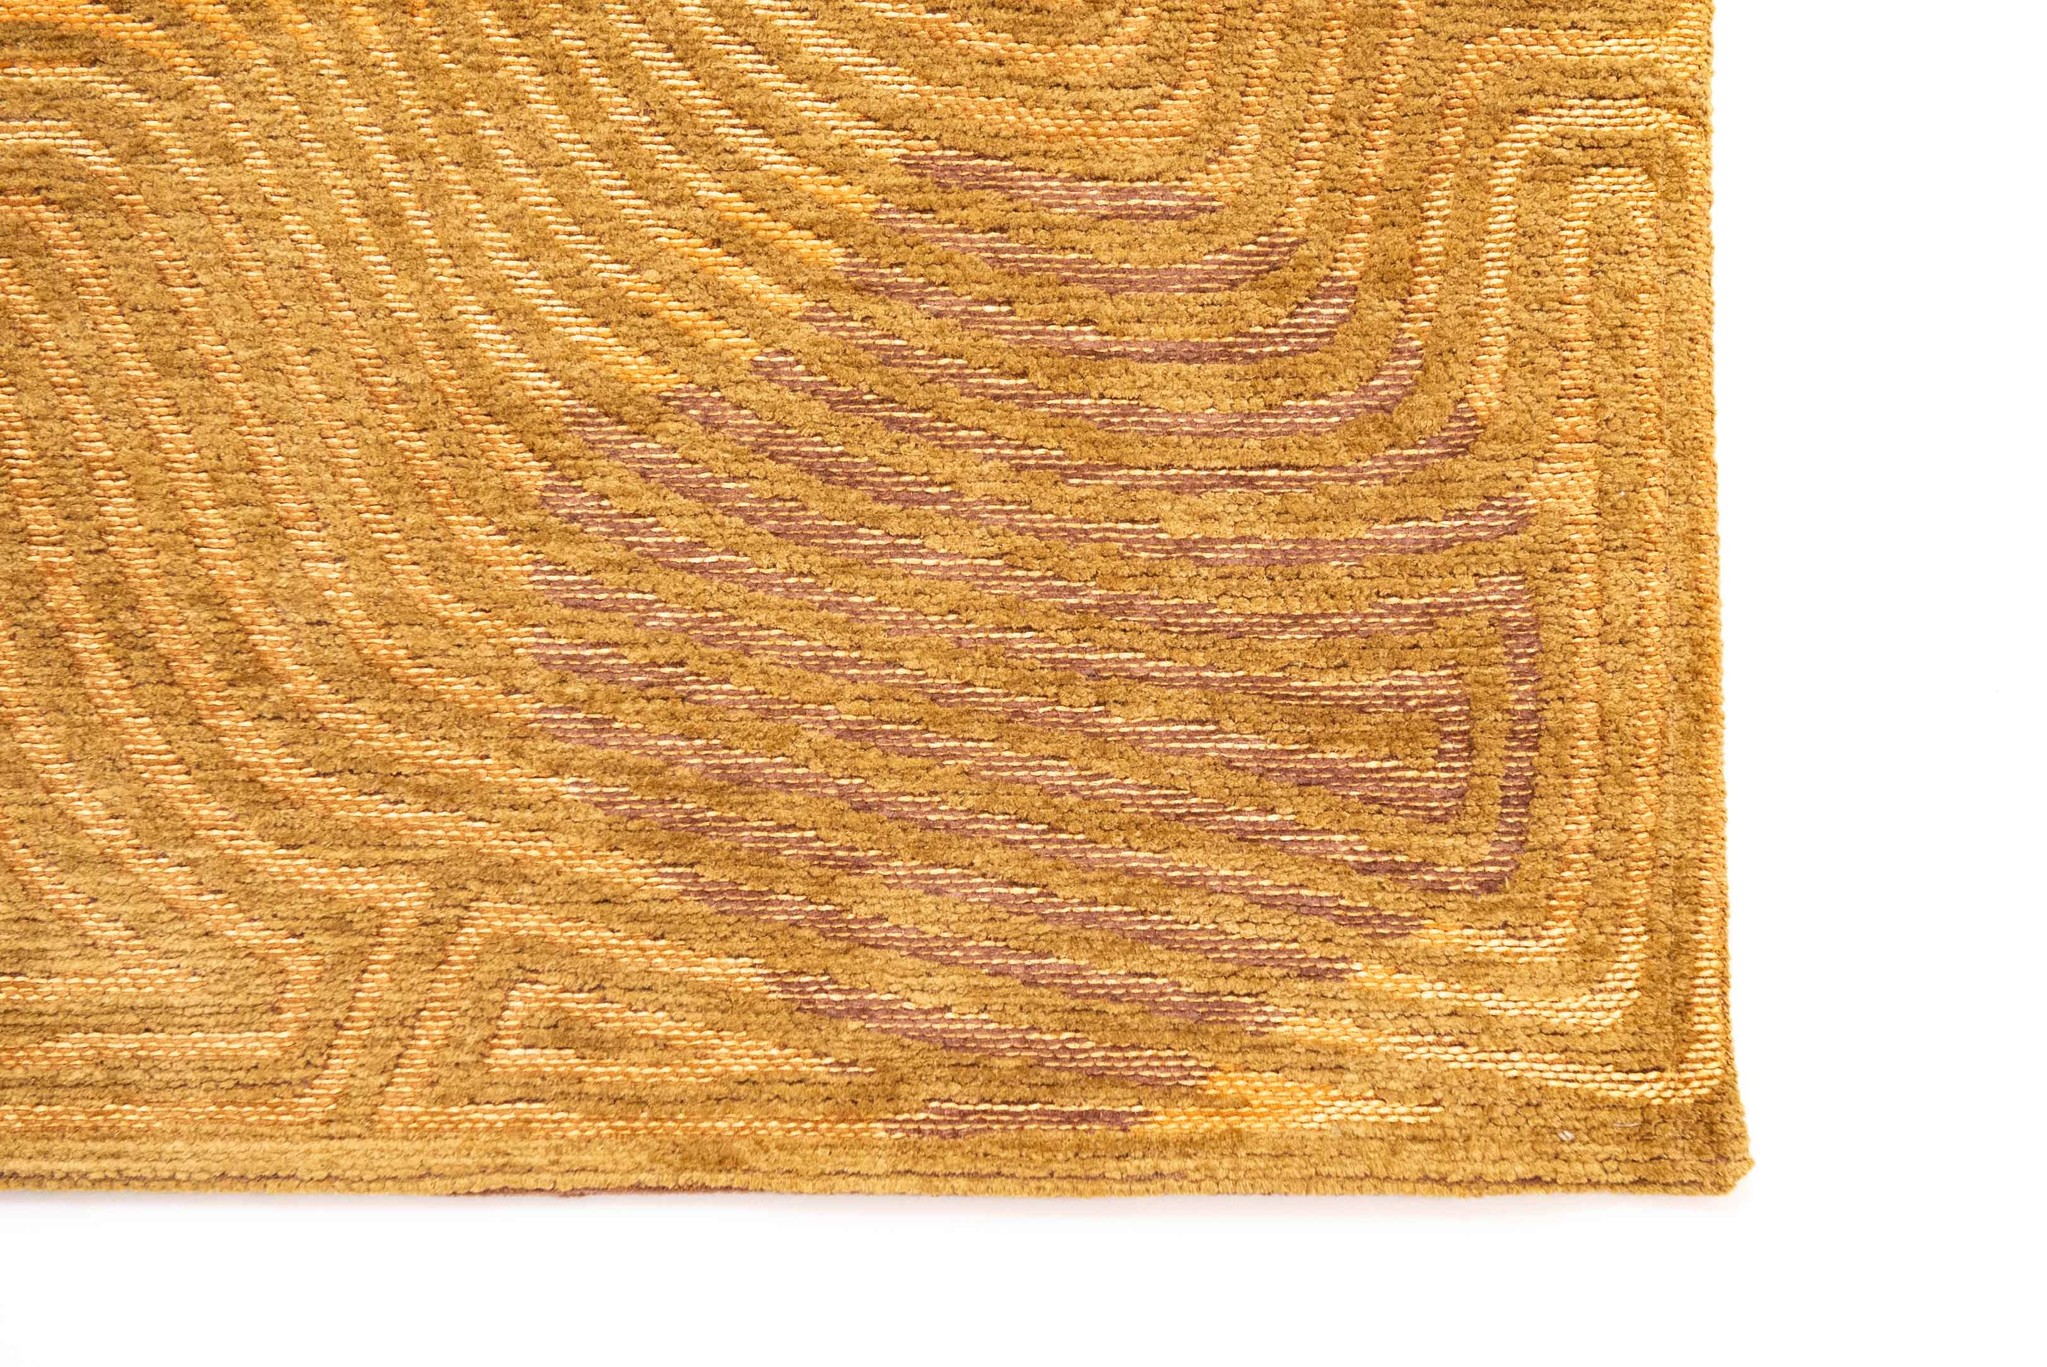 Gold Flatwoven Rug ☞ Size: 5' 7" x 8' (170 x 240 cm)